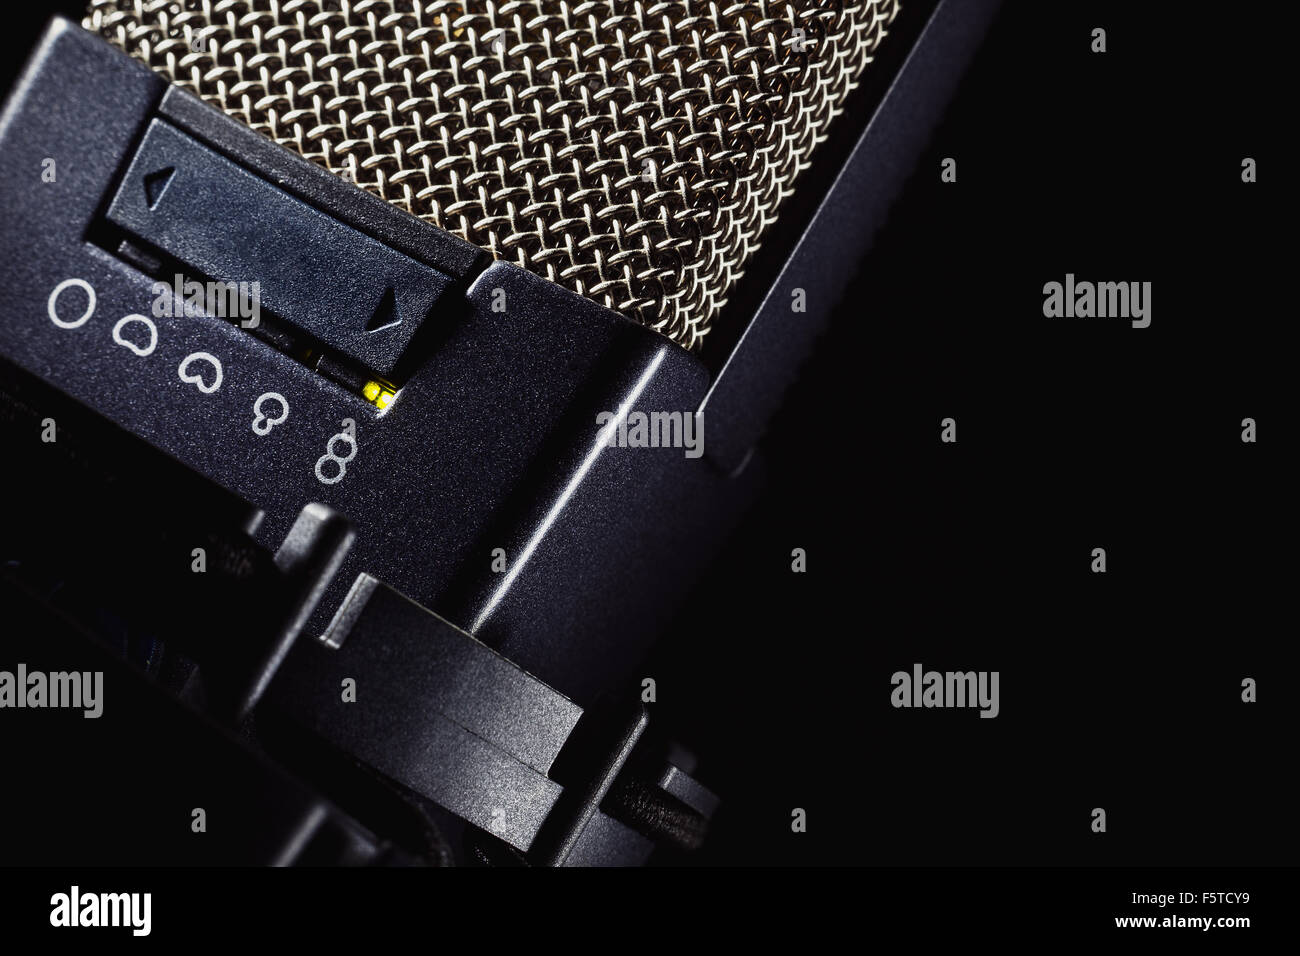 Head details of a microphone, switchers for various frequencies and volume. Stock Photo